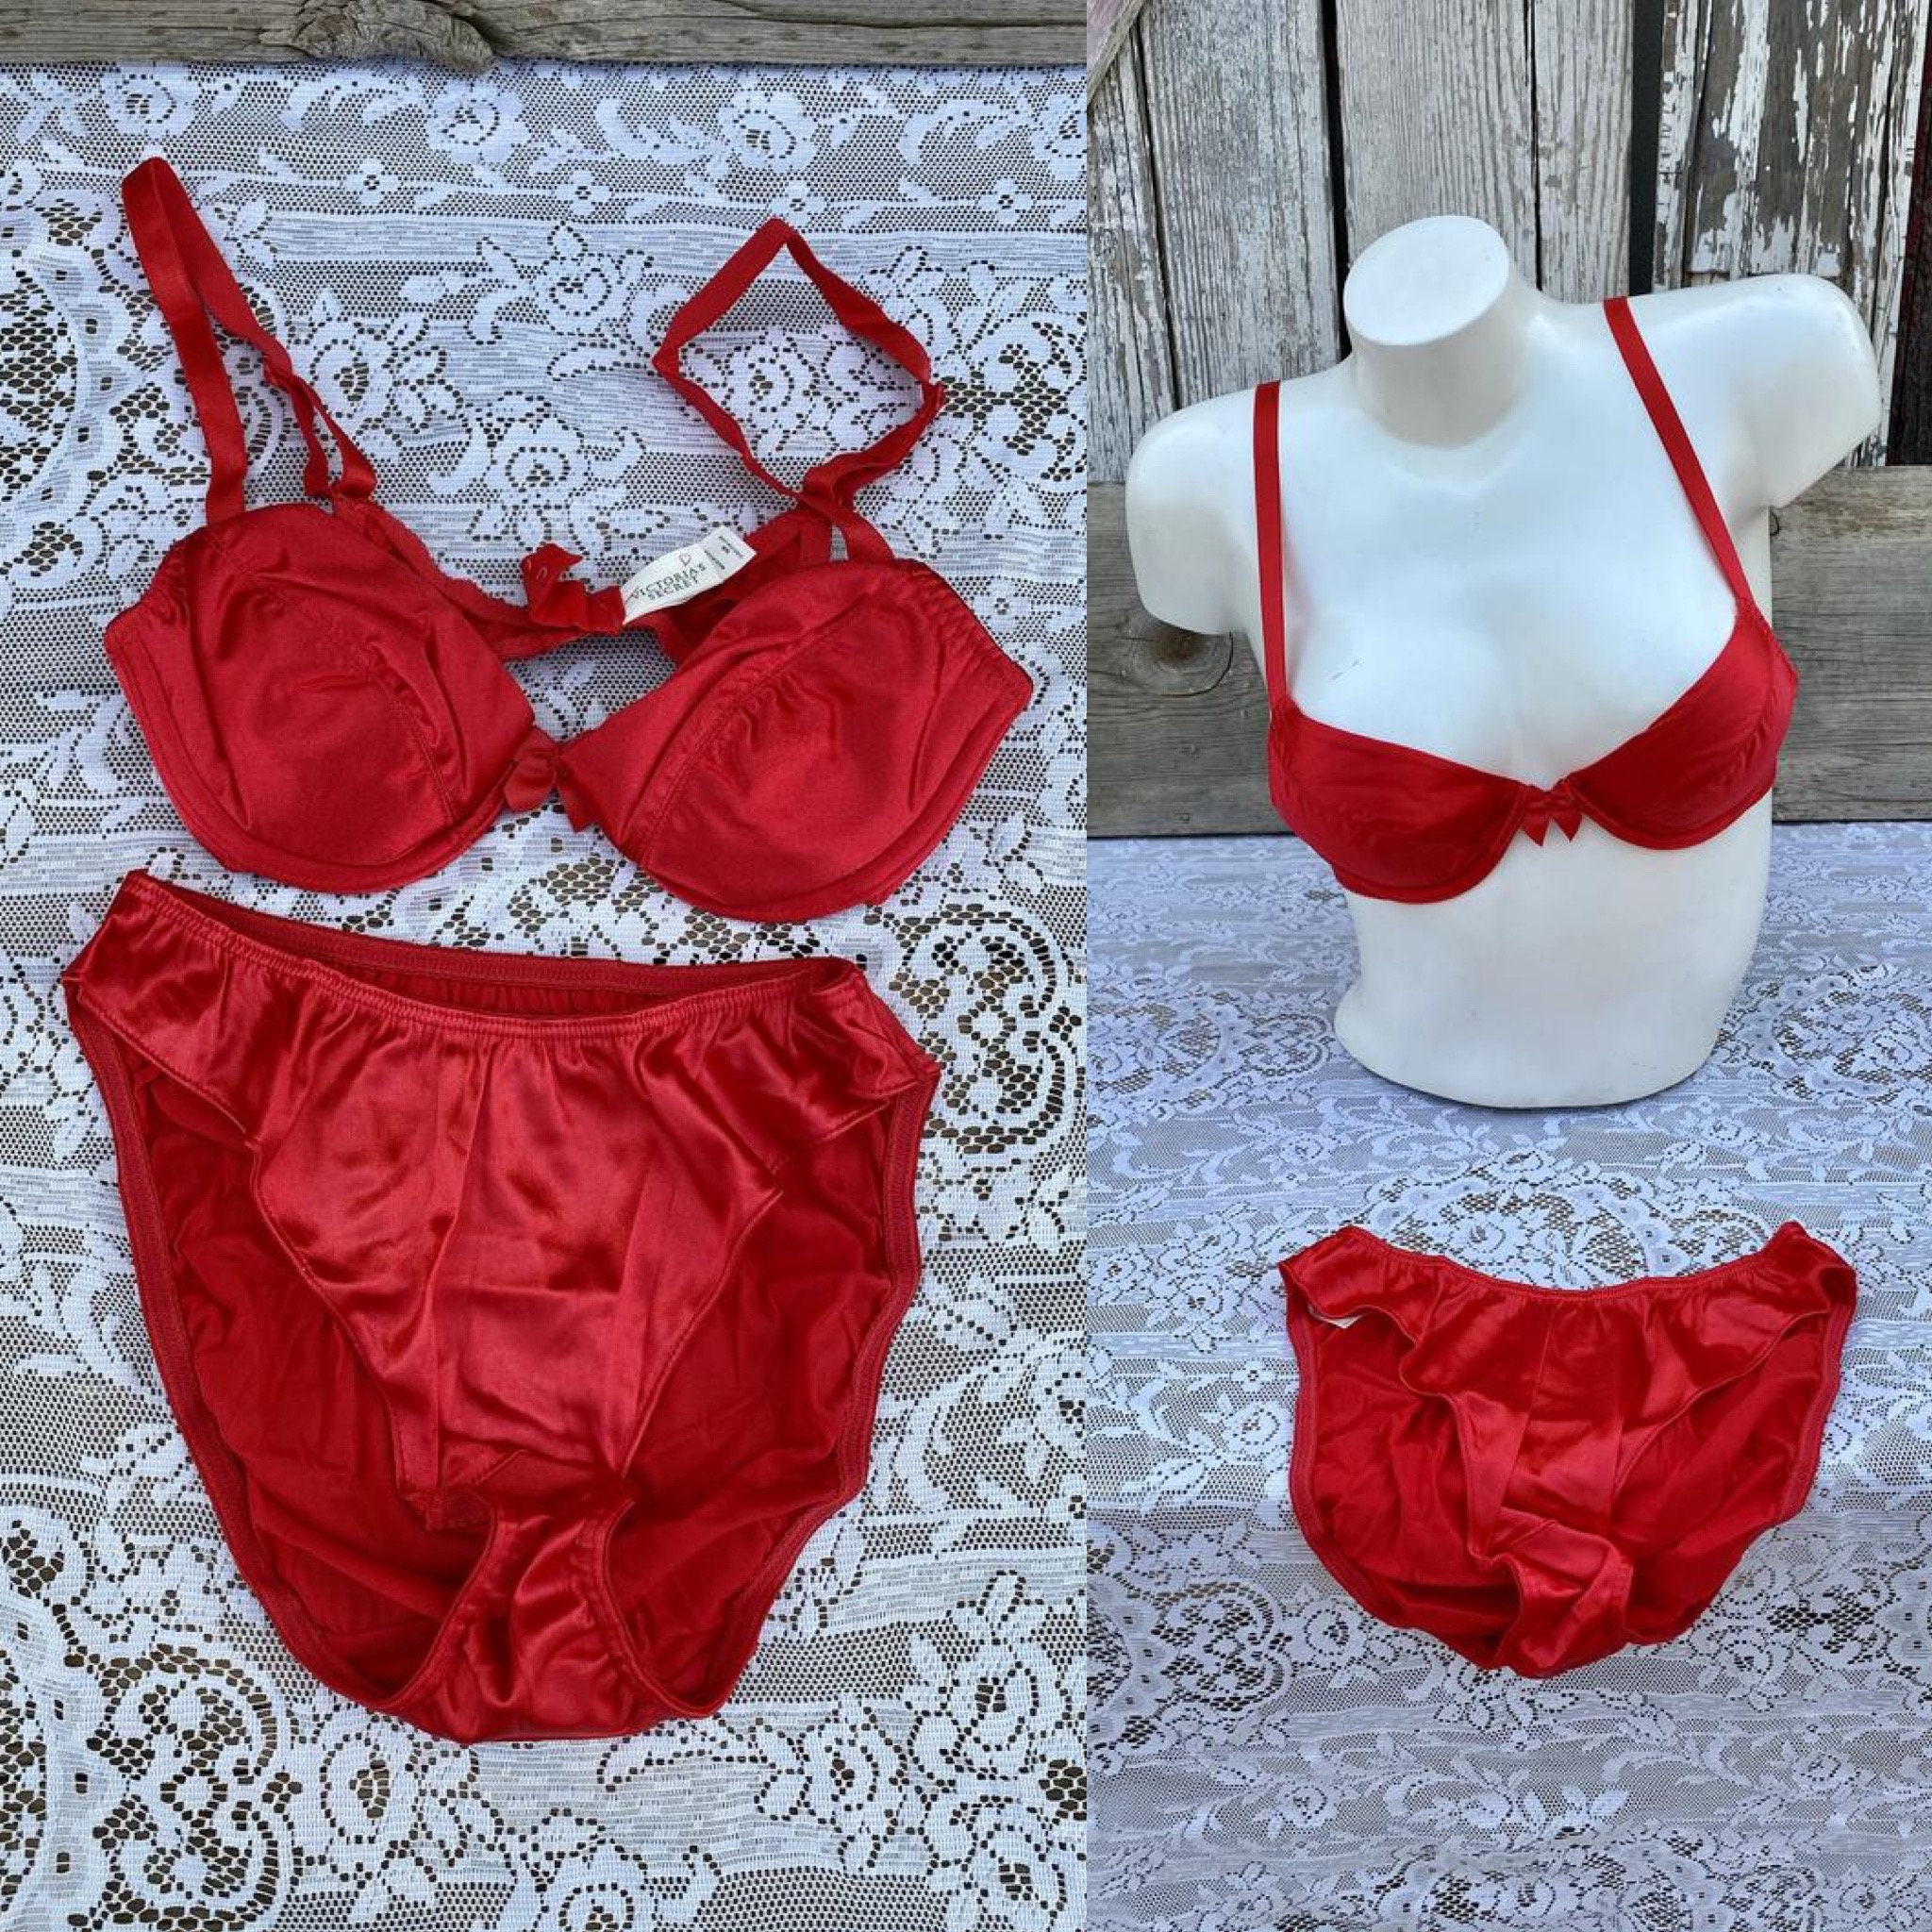 1995 Victoria's Secret 2 Piece Set Red Satin Miracle Bra 32B With Matching  Red Bikini Panties Size S NEW Old Stock -  Ireland